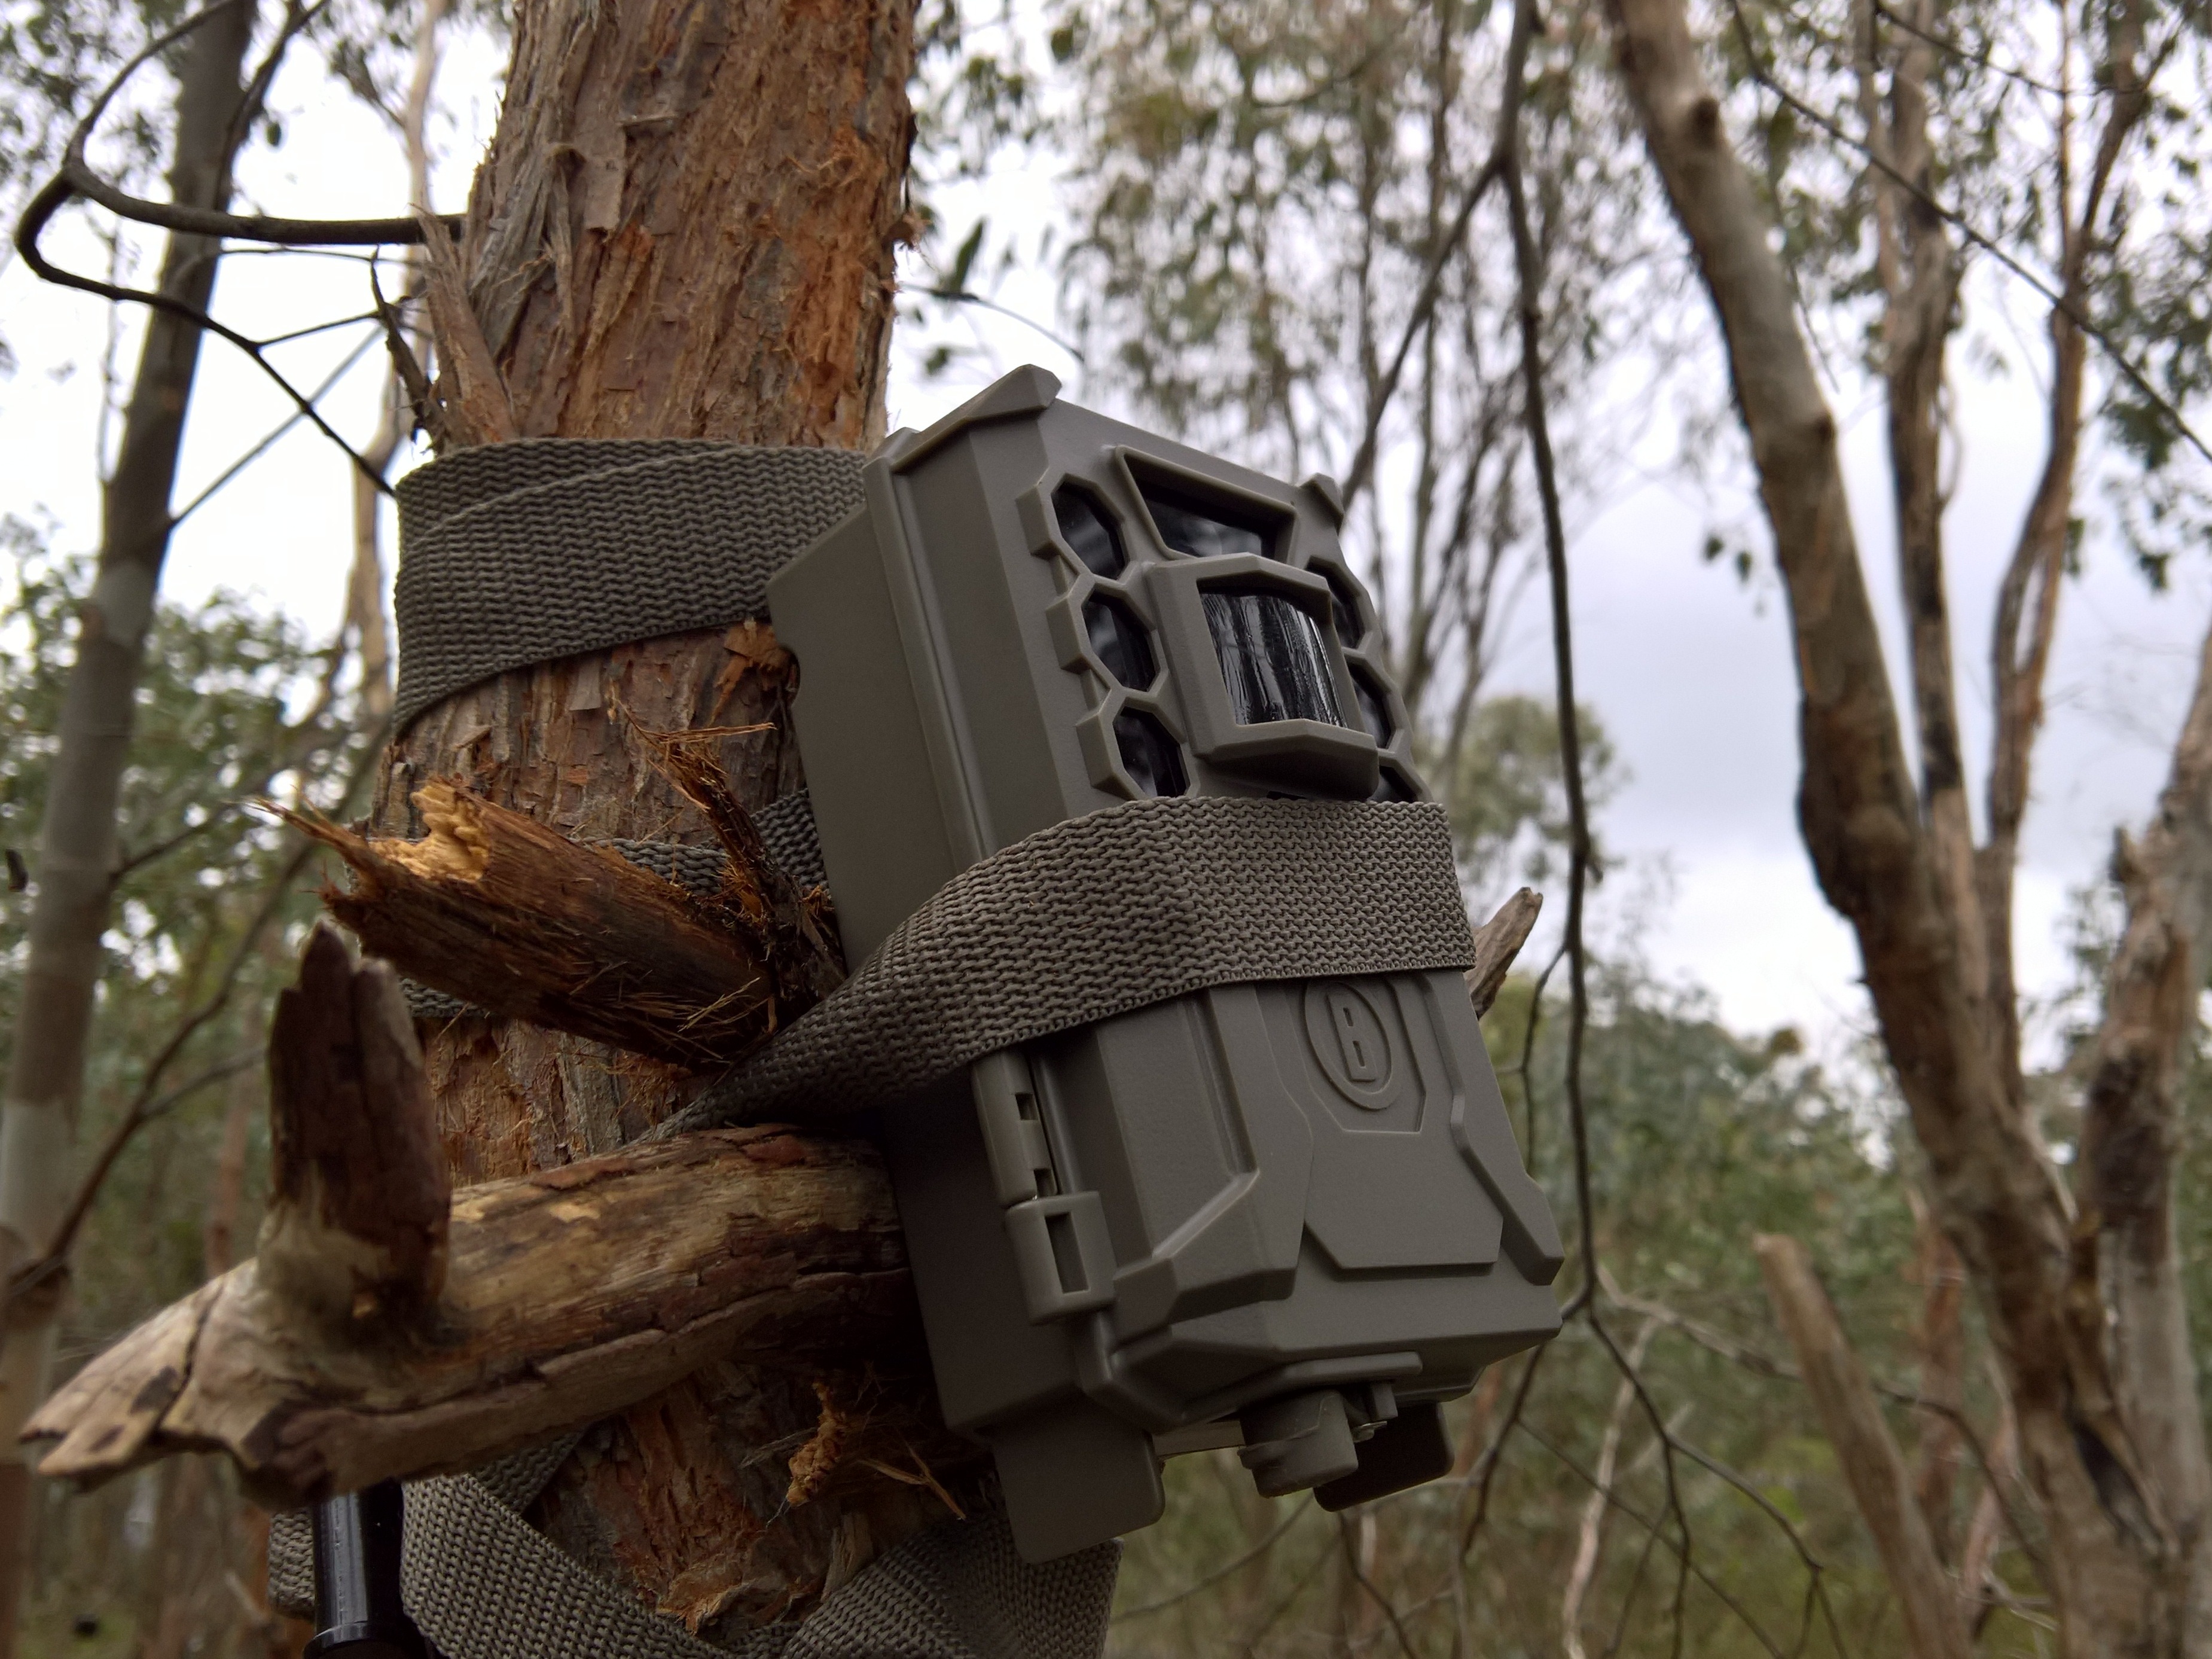 A wildlife monitoring camera mounted to a tree